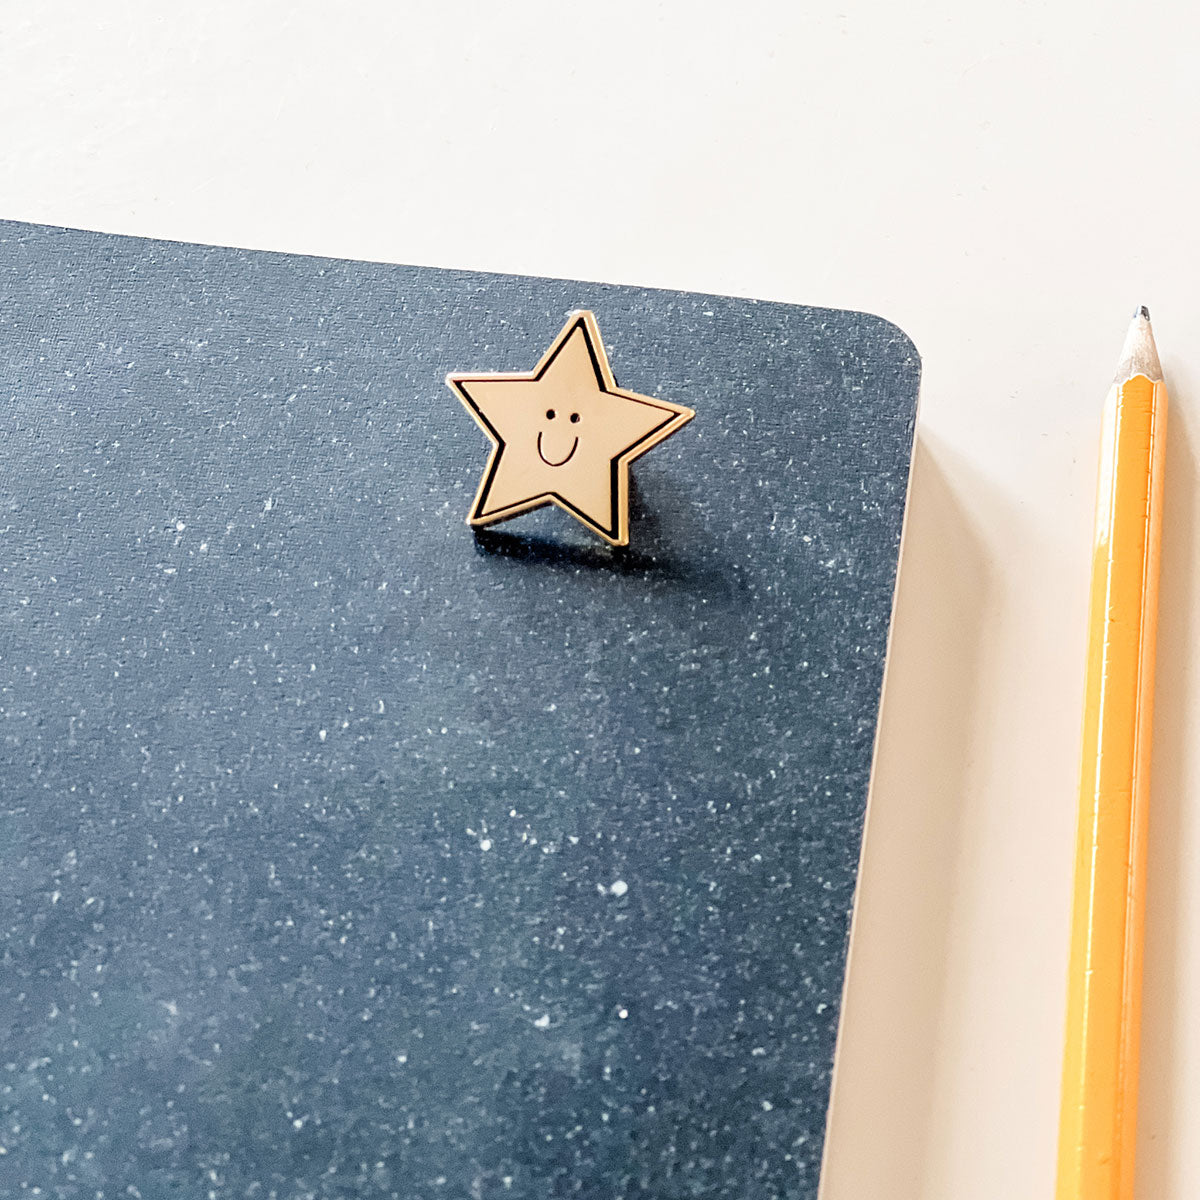 Star Pin on Notebook close up